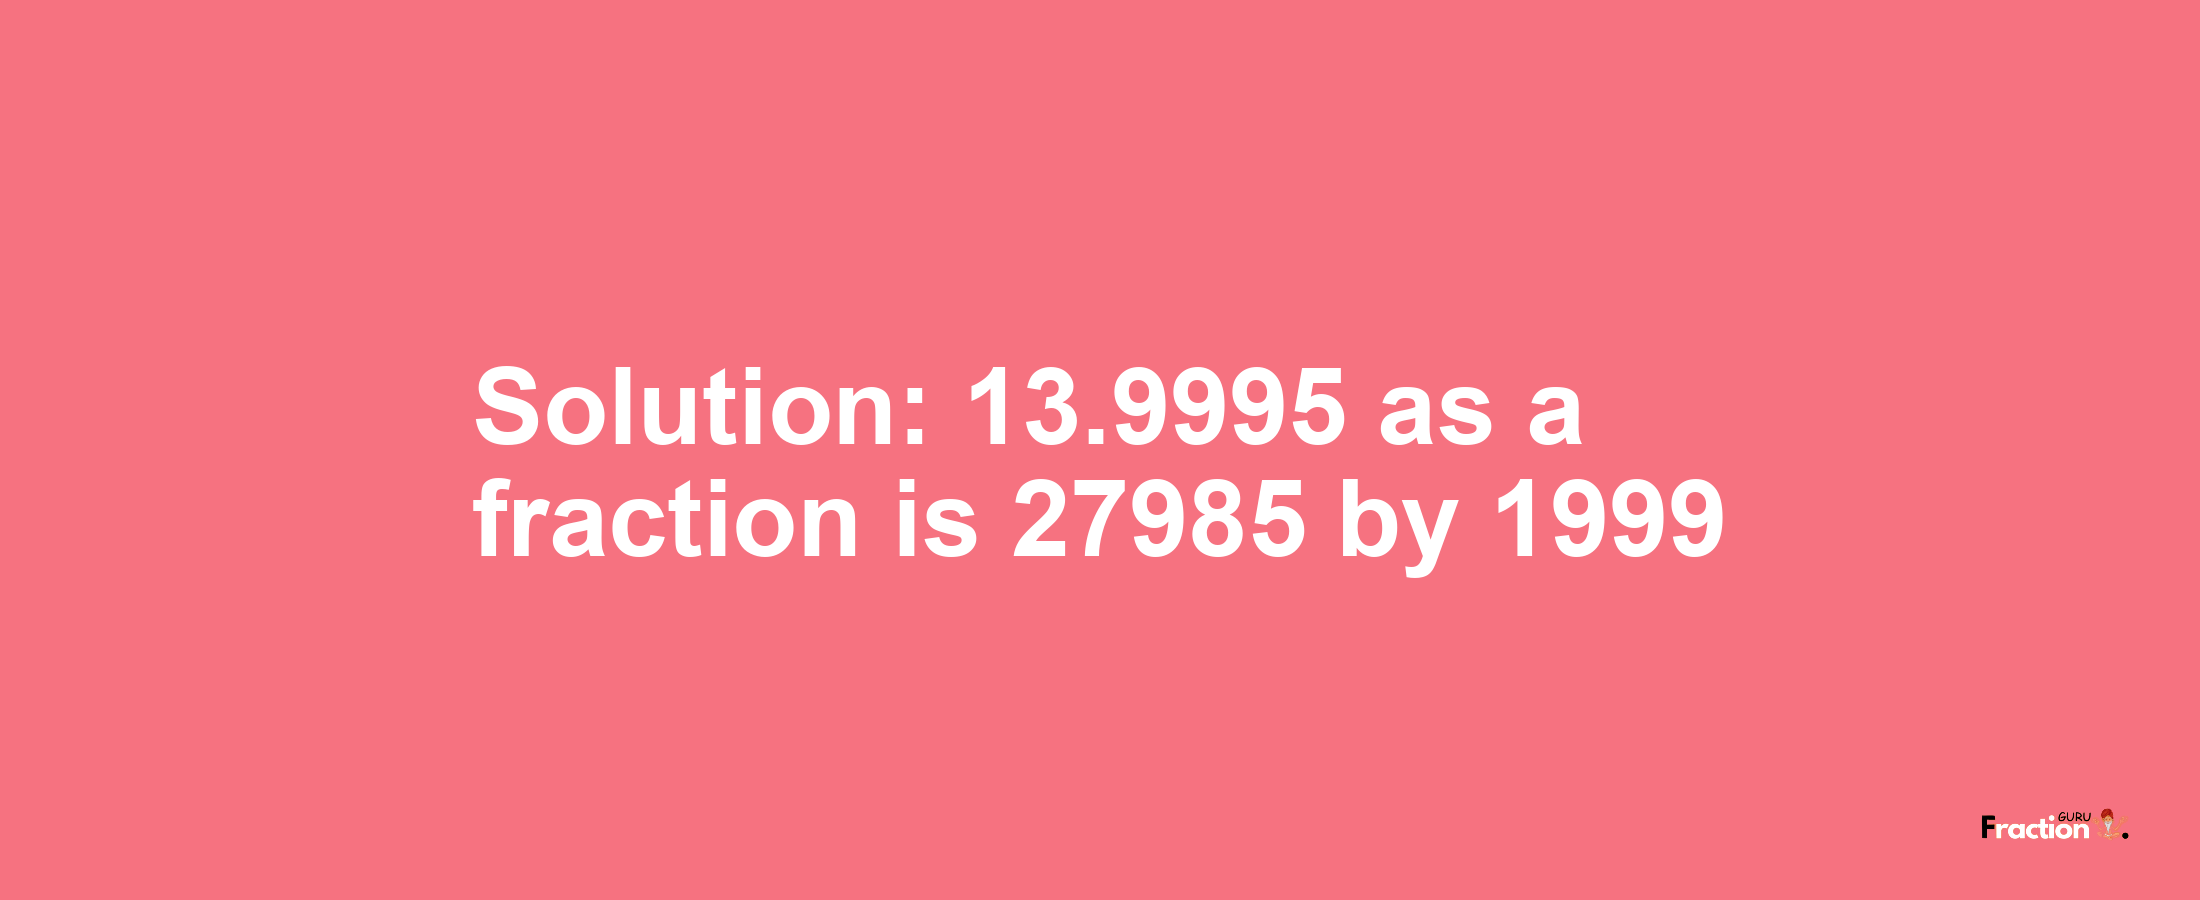 Solution:13.9995 as a fraction is 27985/1999